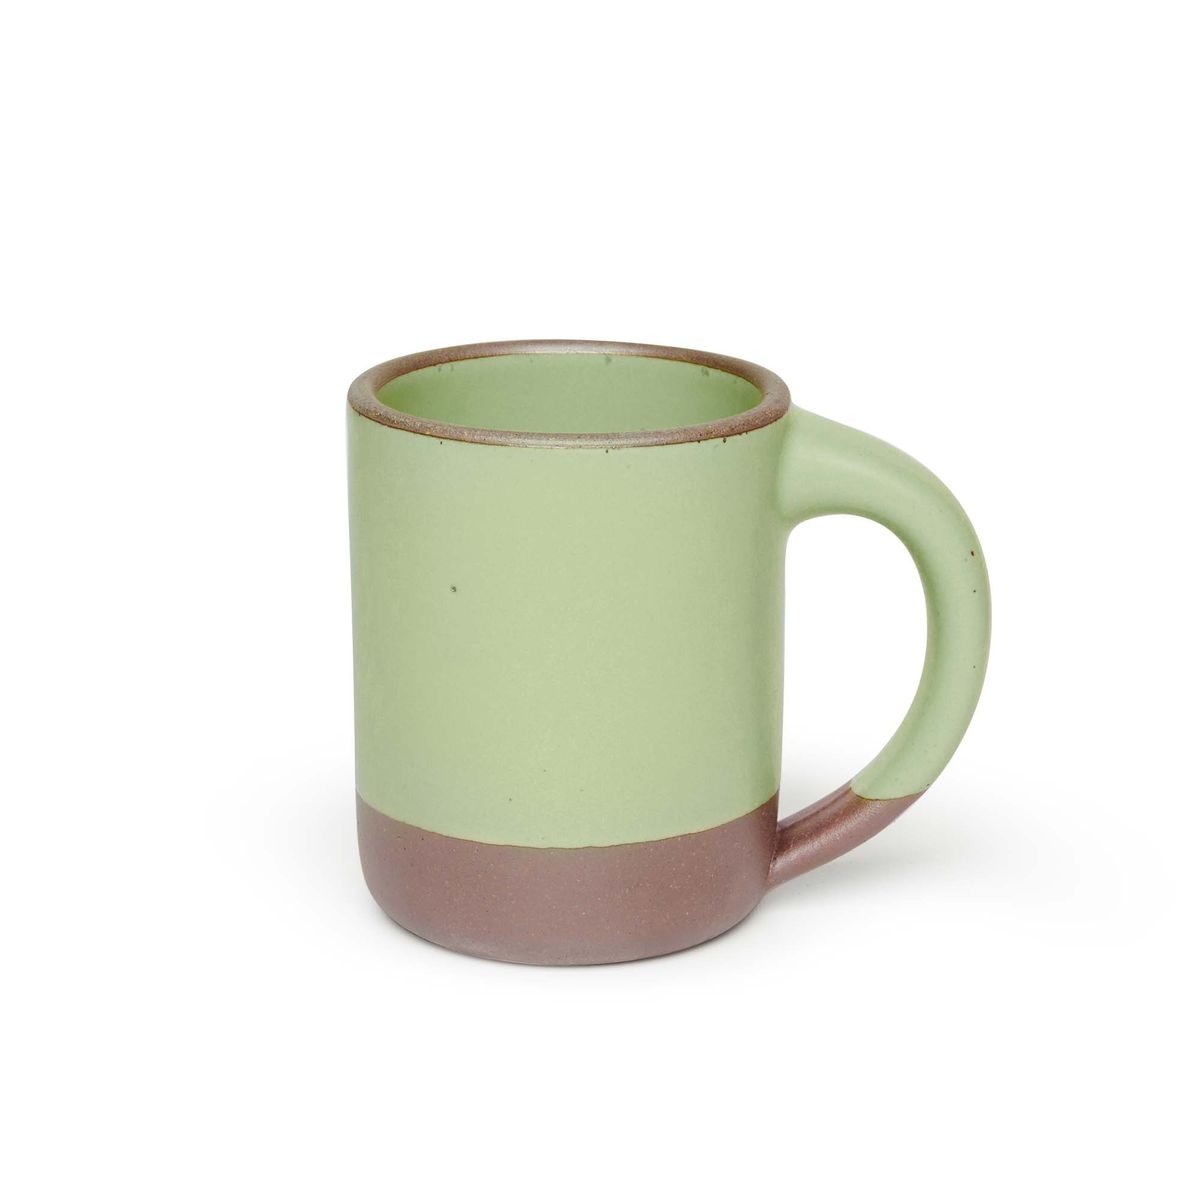 A big sized ceramic mug with handle in a calming sage green color featuring iron speckles and unglazed rim and bottom base.